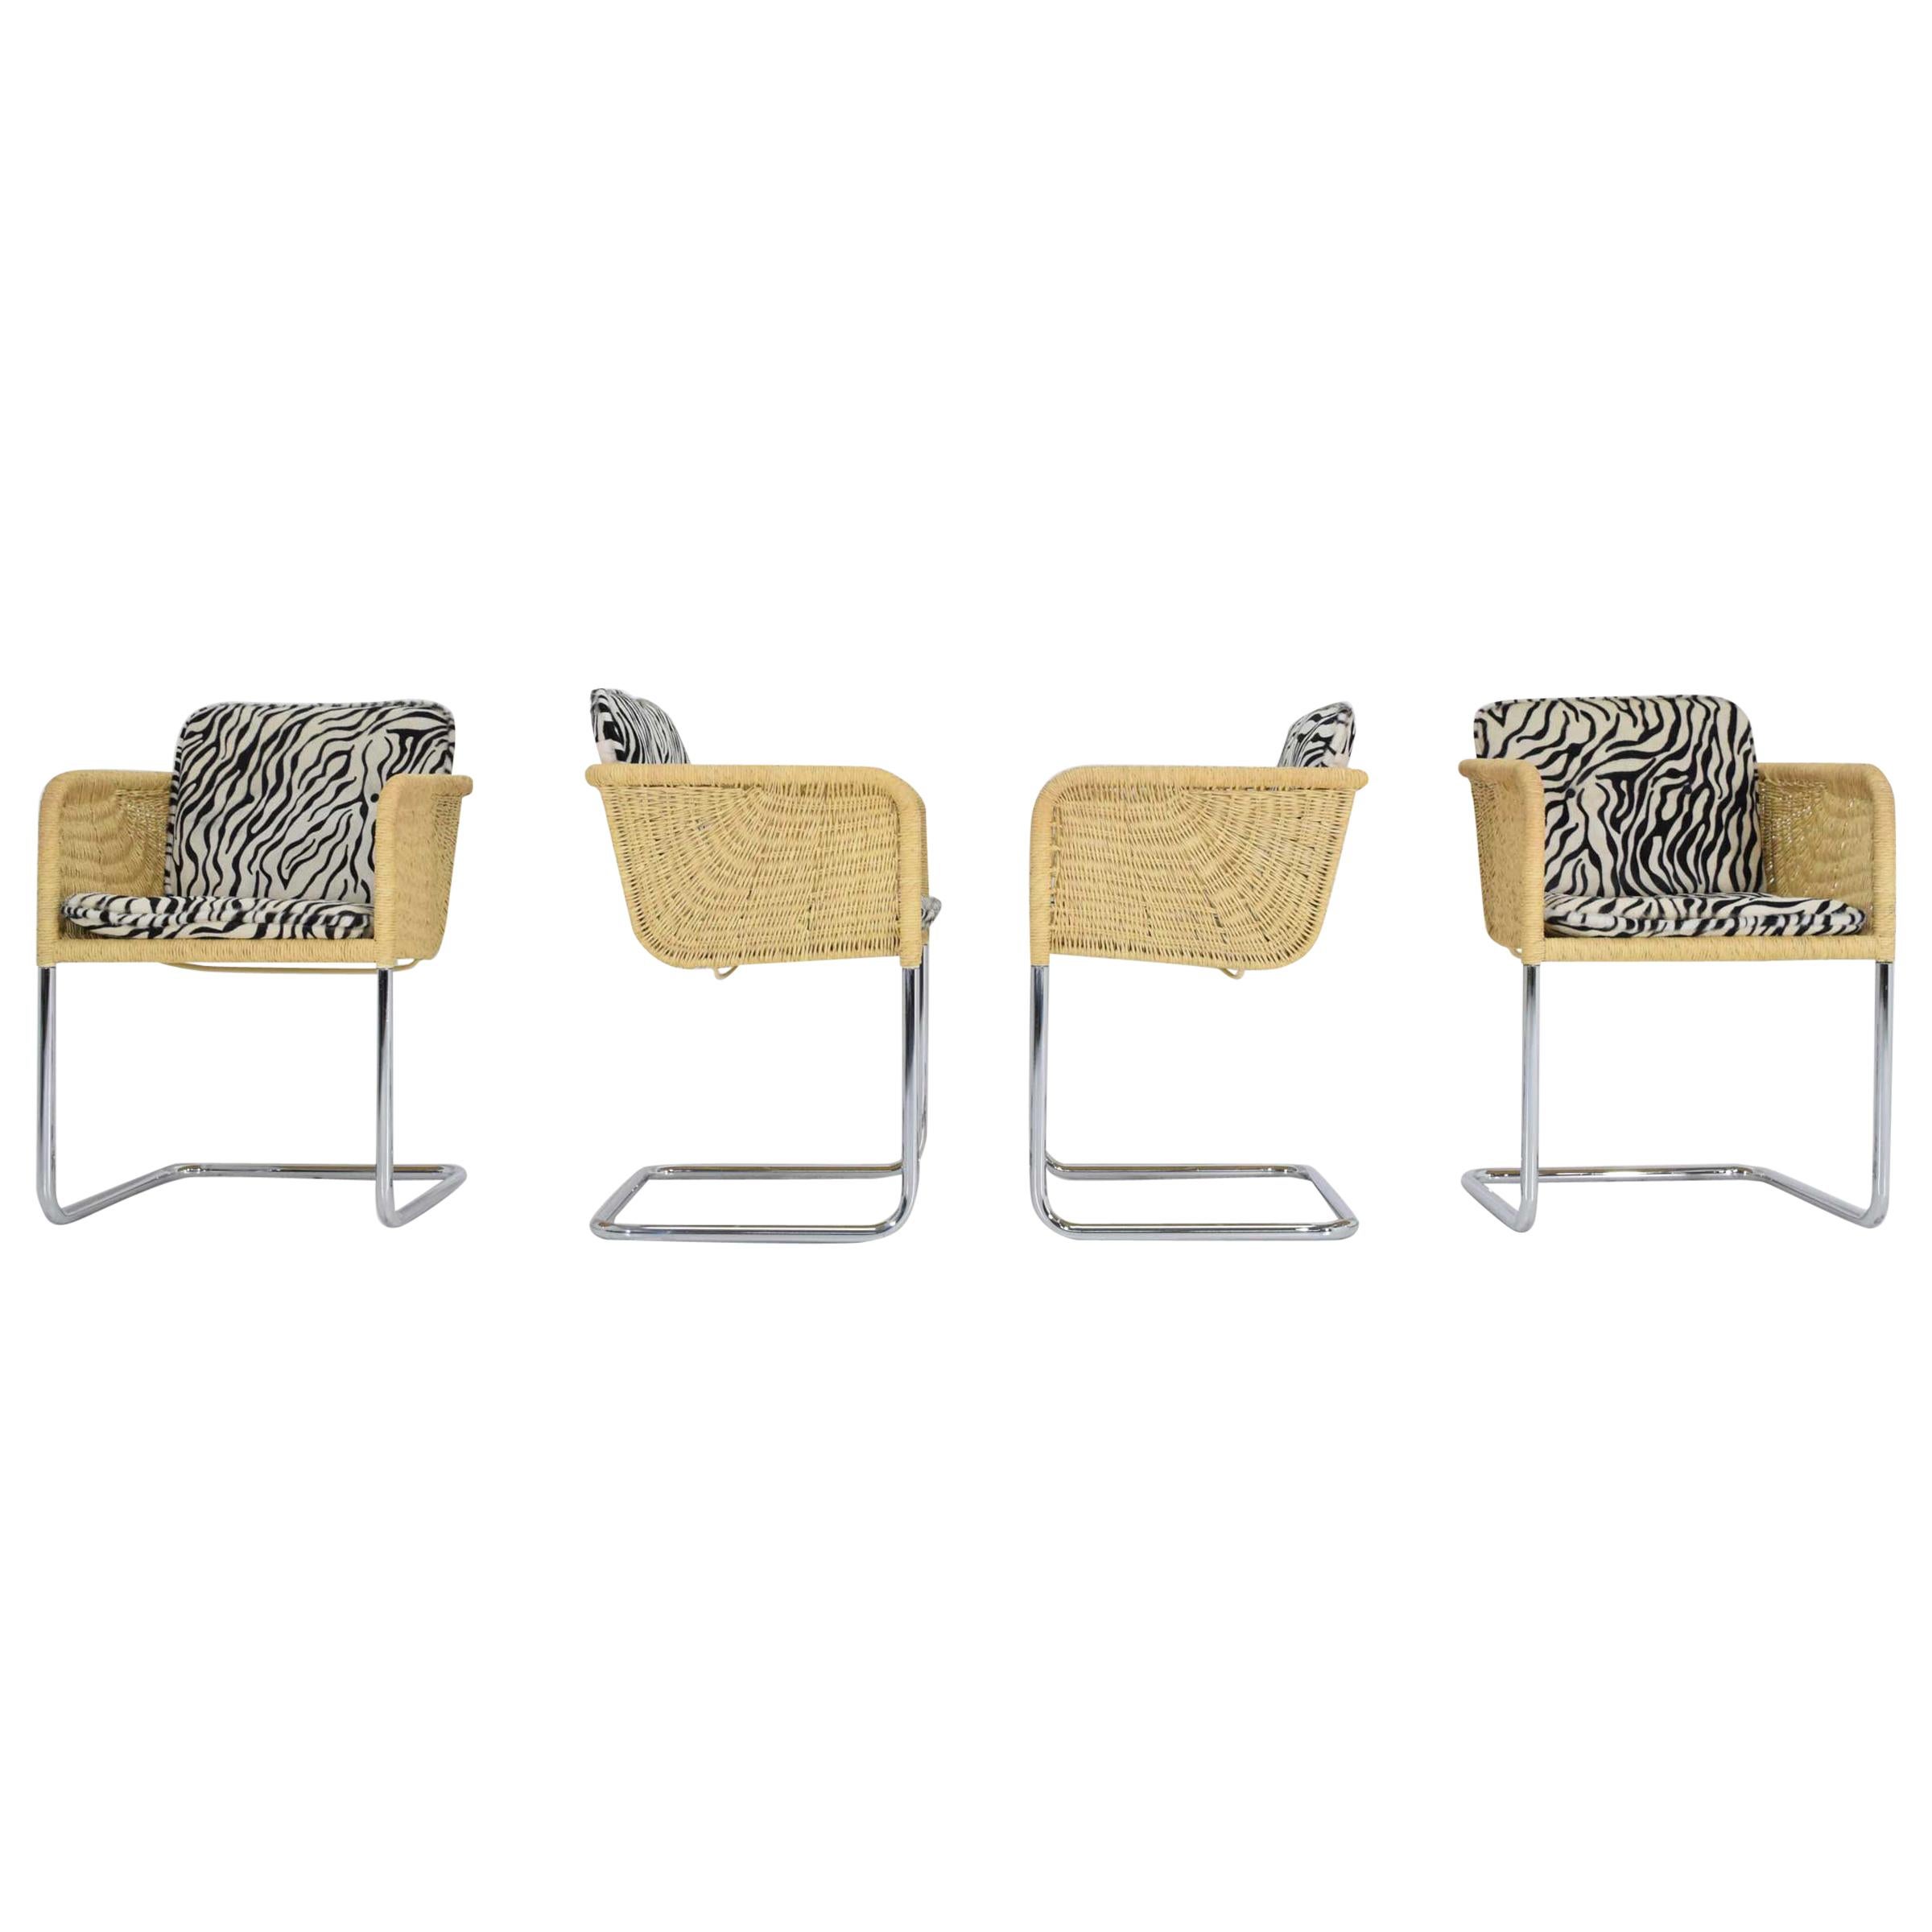 Harvey Probber Wicker Dining Chairs with Zebra Hide Cushions